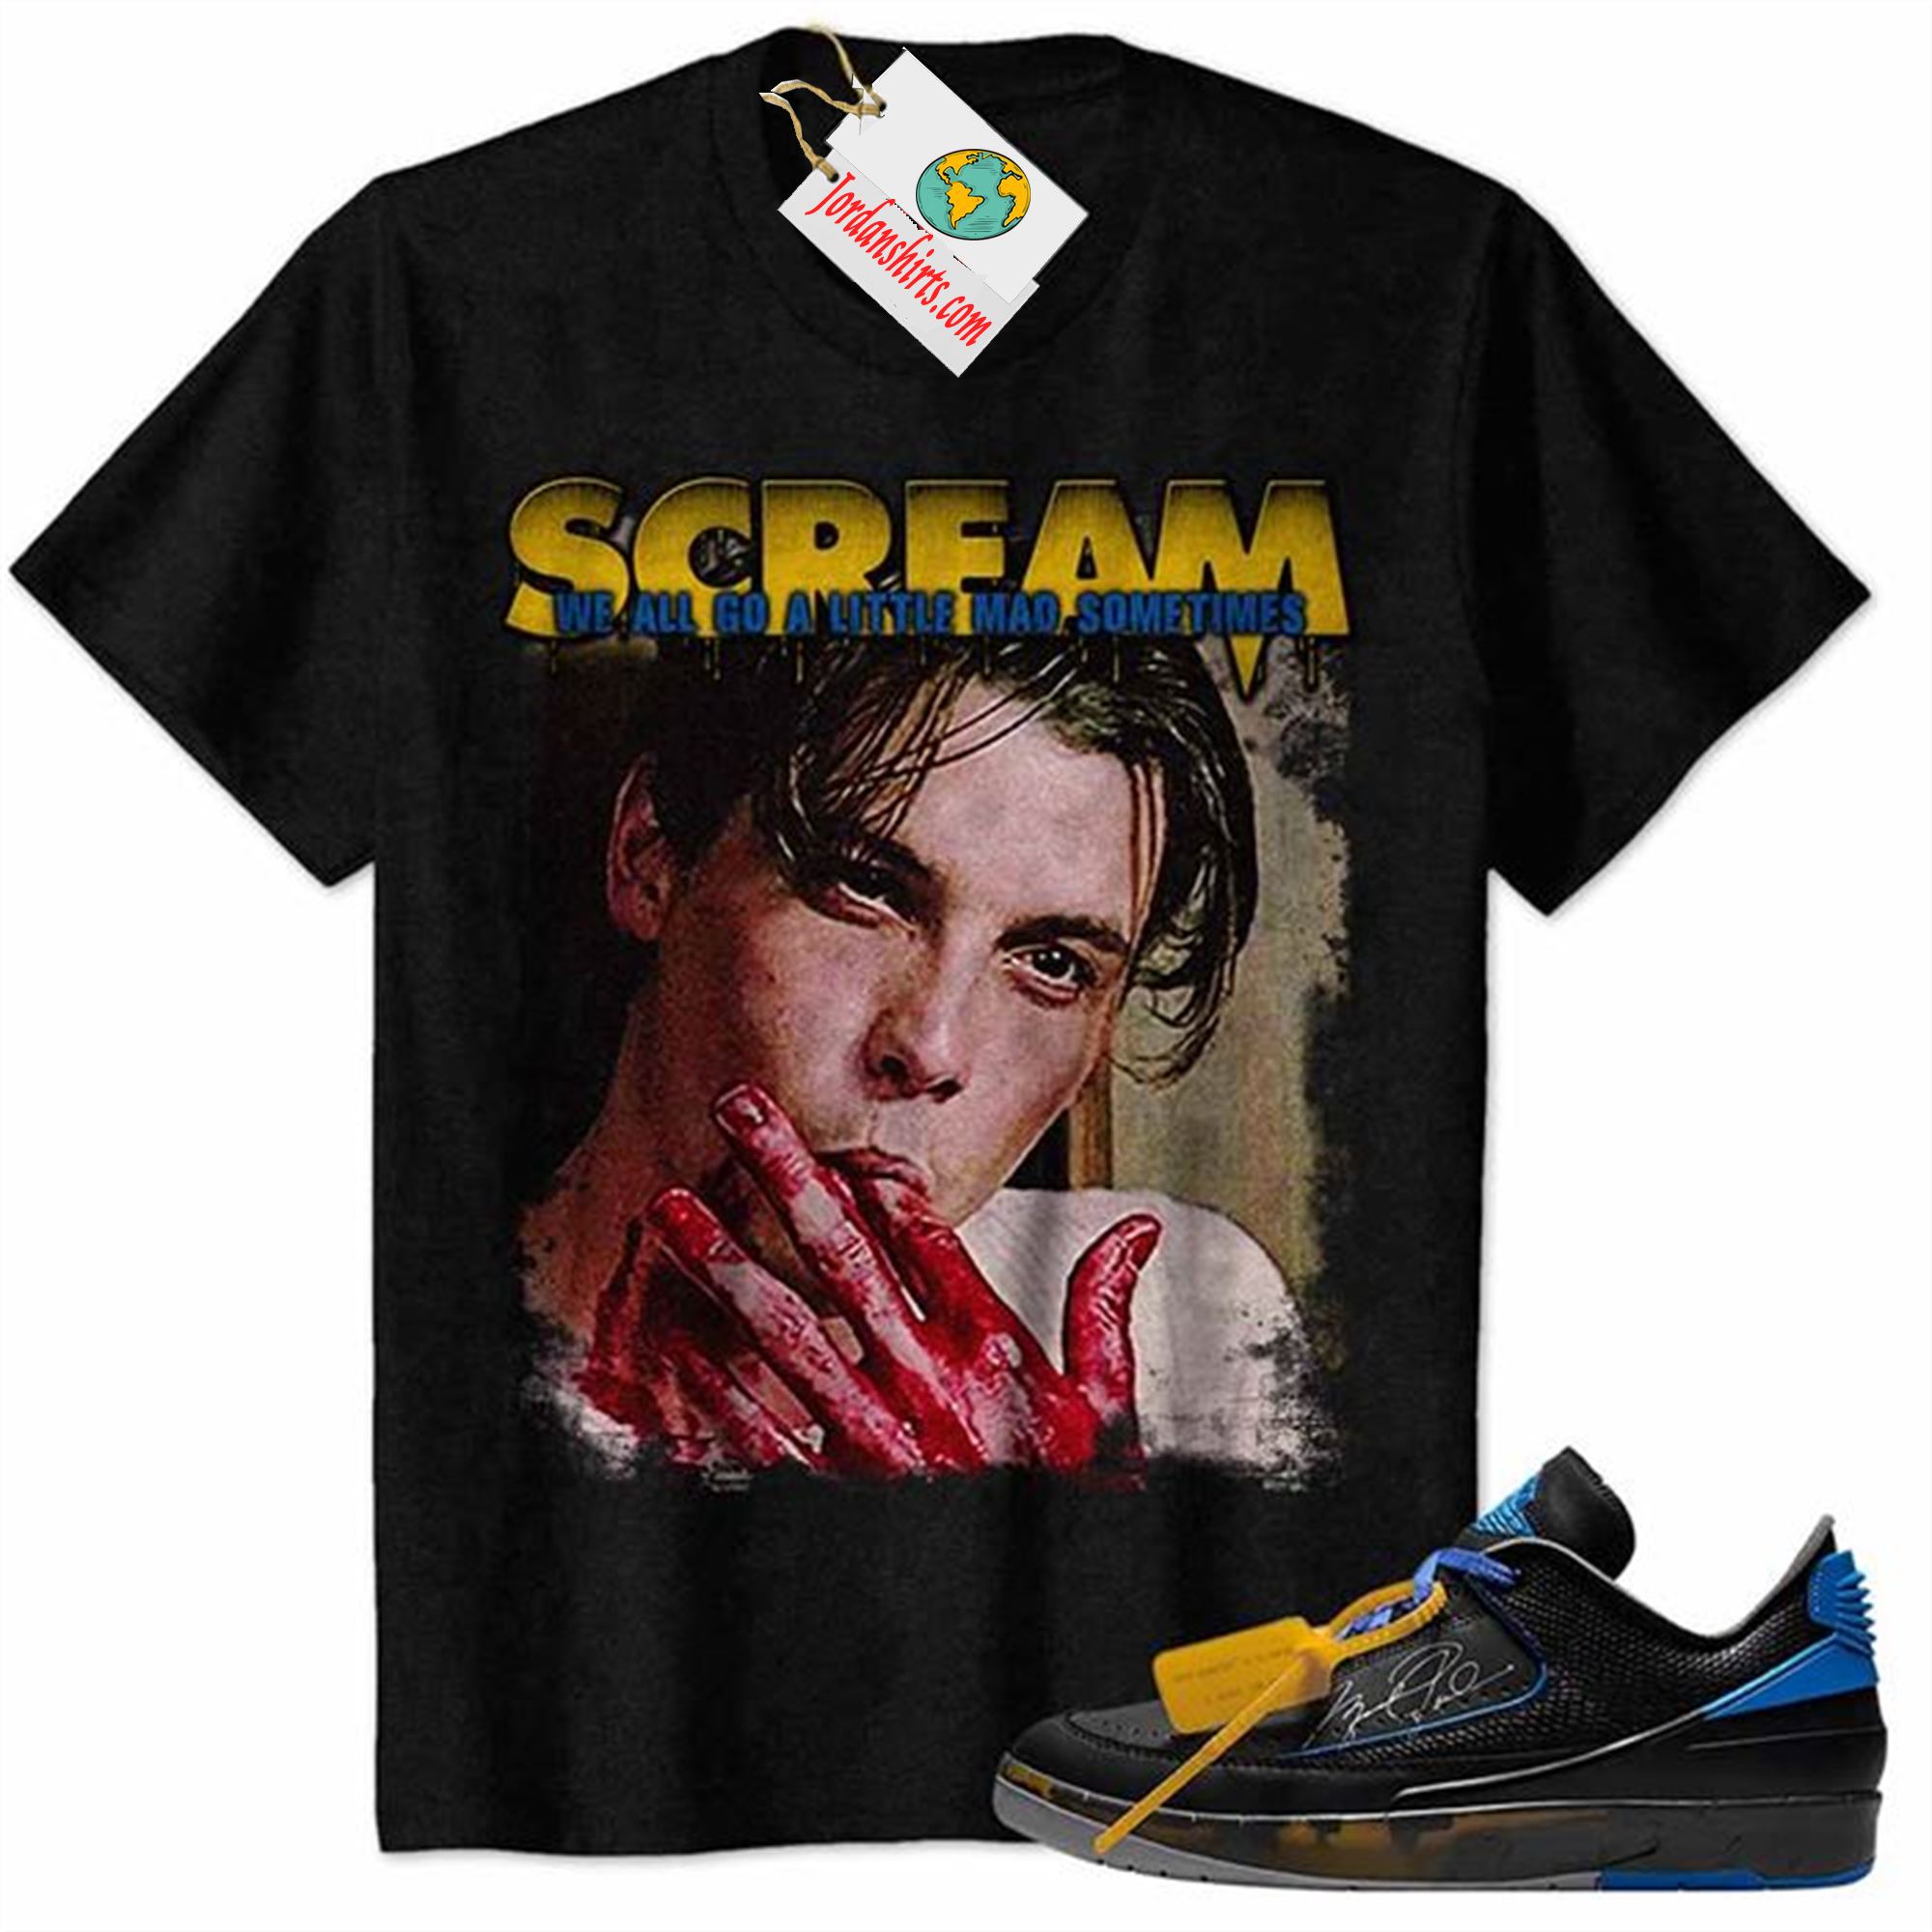 Jordan 2 Shirt, Scream Horror Movies Ghostface Billy Loomis We All Go A Little Mad Black Air Jordan 2 Low X Off-white Black And Varsity Royal 2s Plus Size Up To 5xl